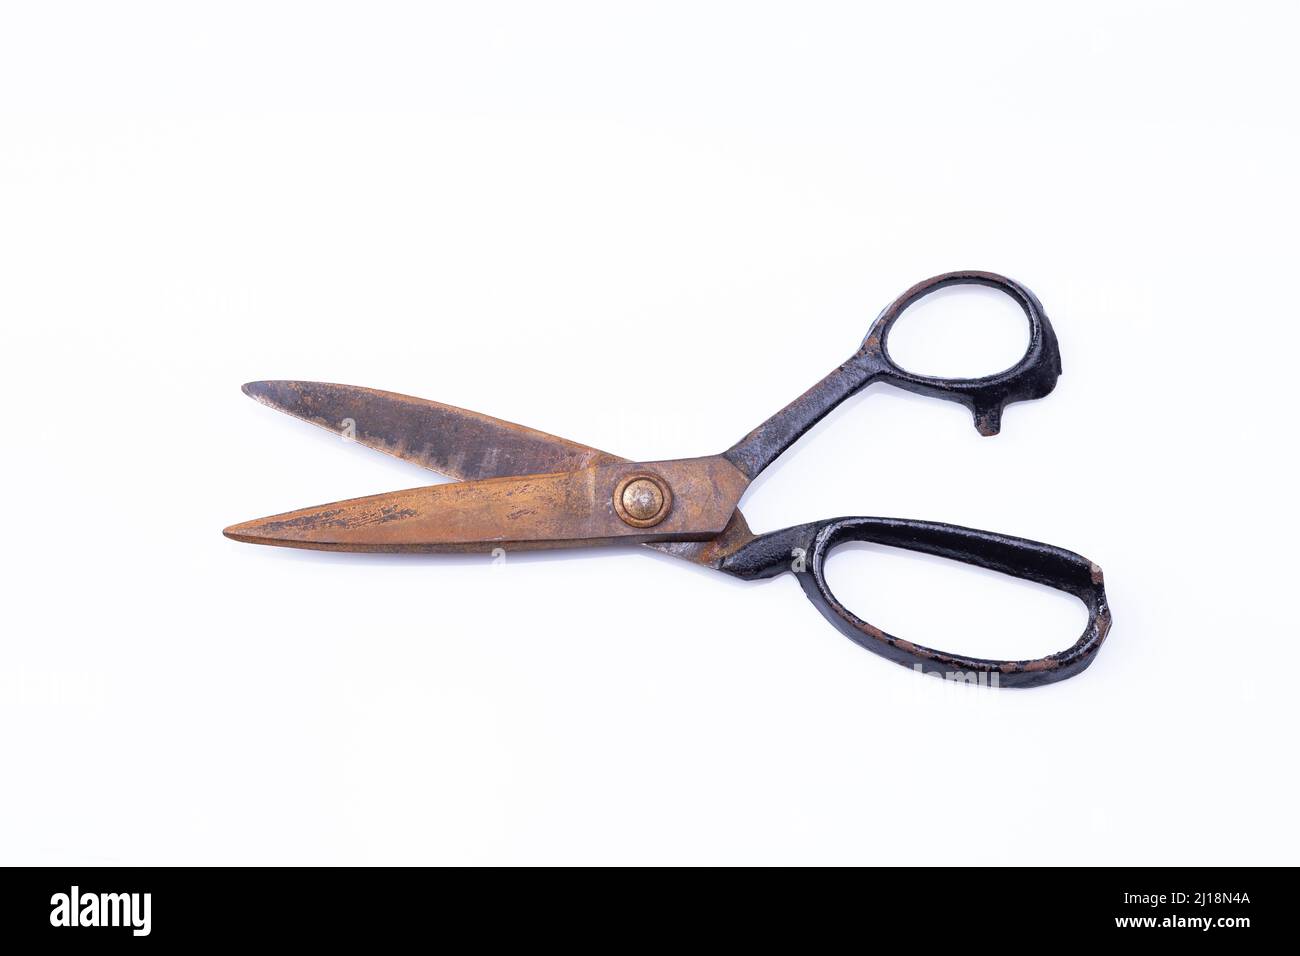 The photo shows an old rusty scissors on white background Stock Photo